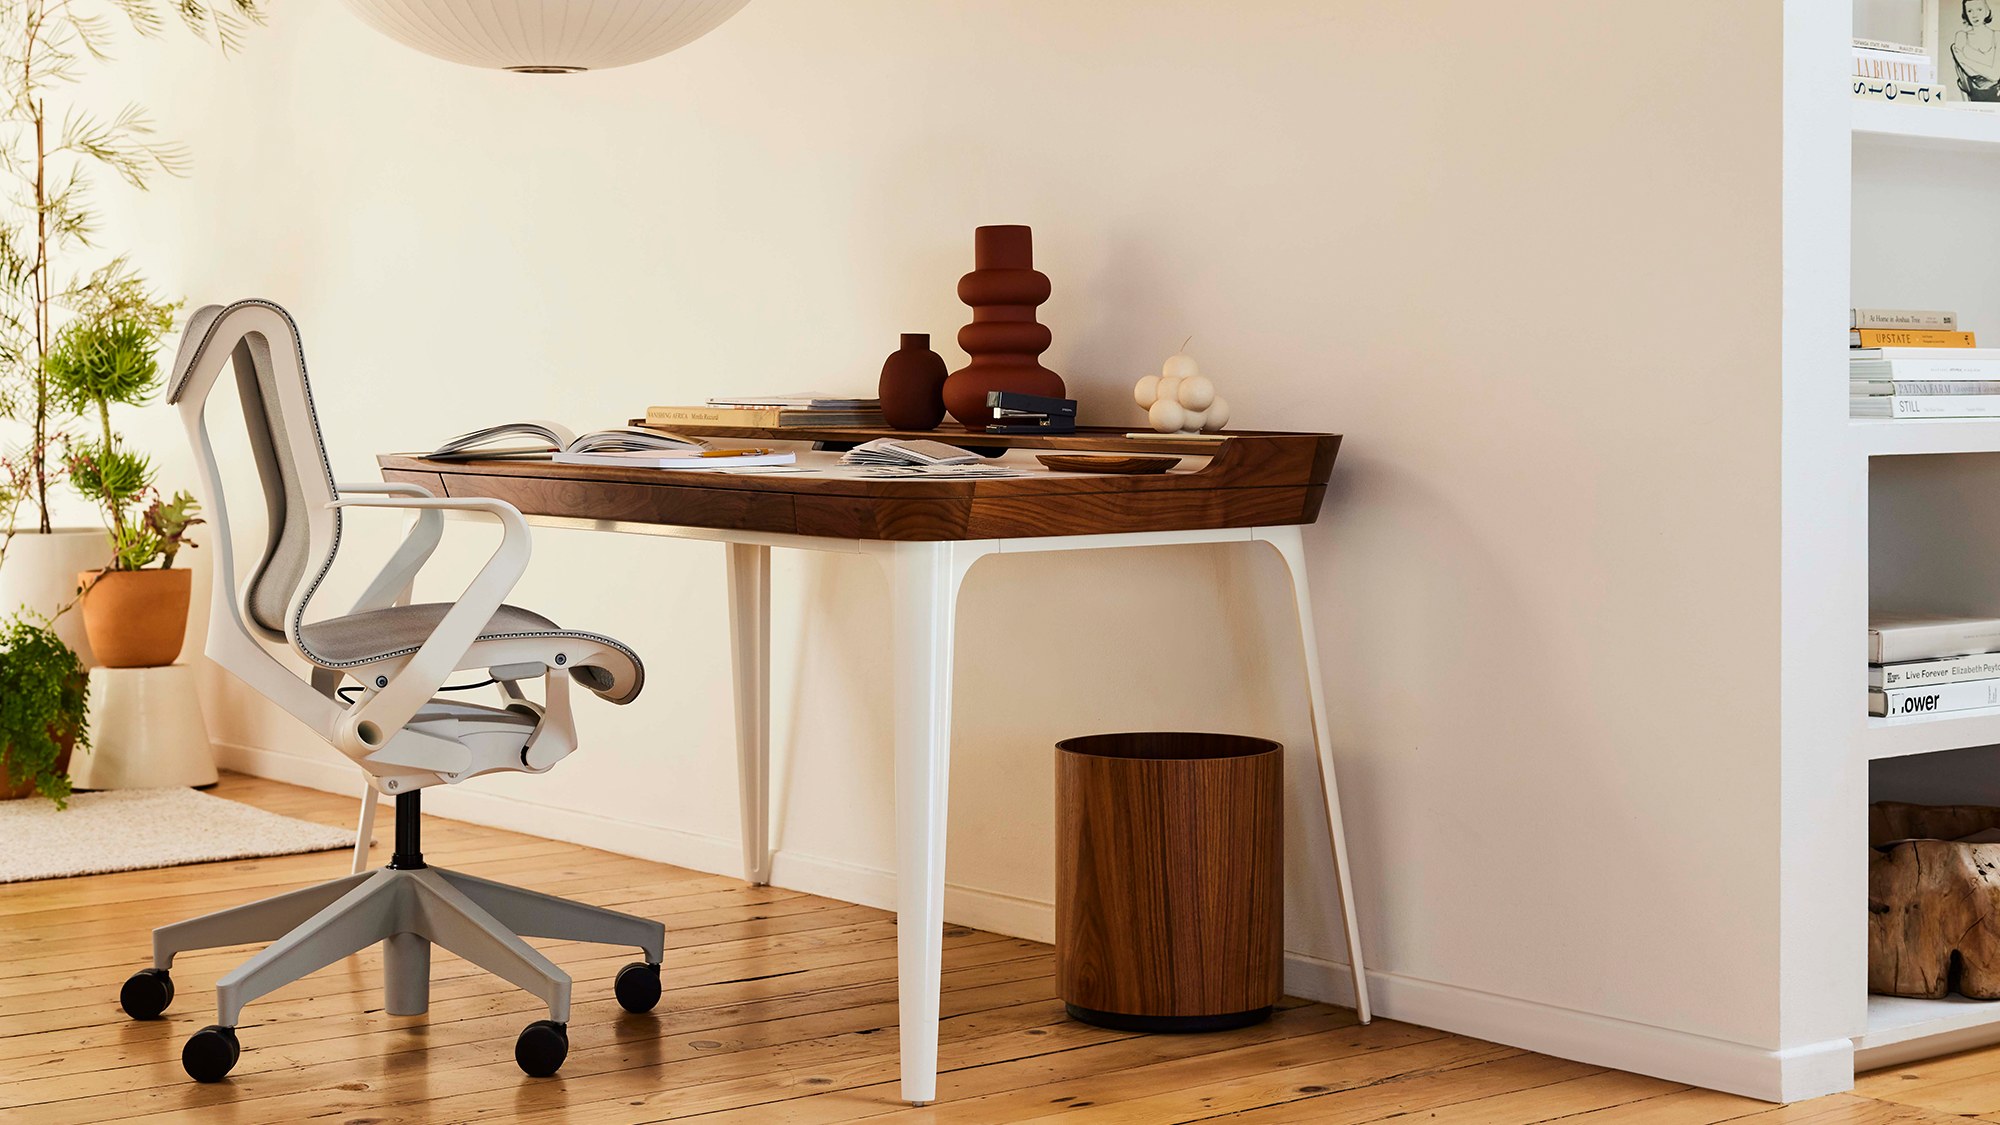 As ergonomically innovative as it is beautiful, the Cosm Chair instantly adjusts itself to fit you, for full body support.